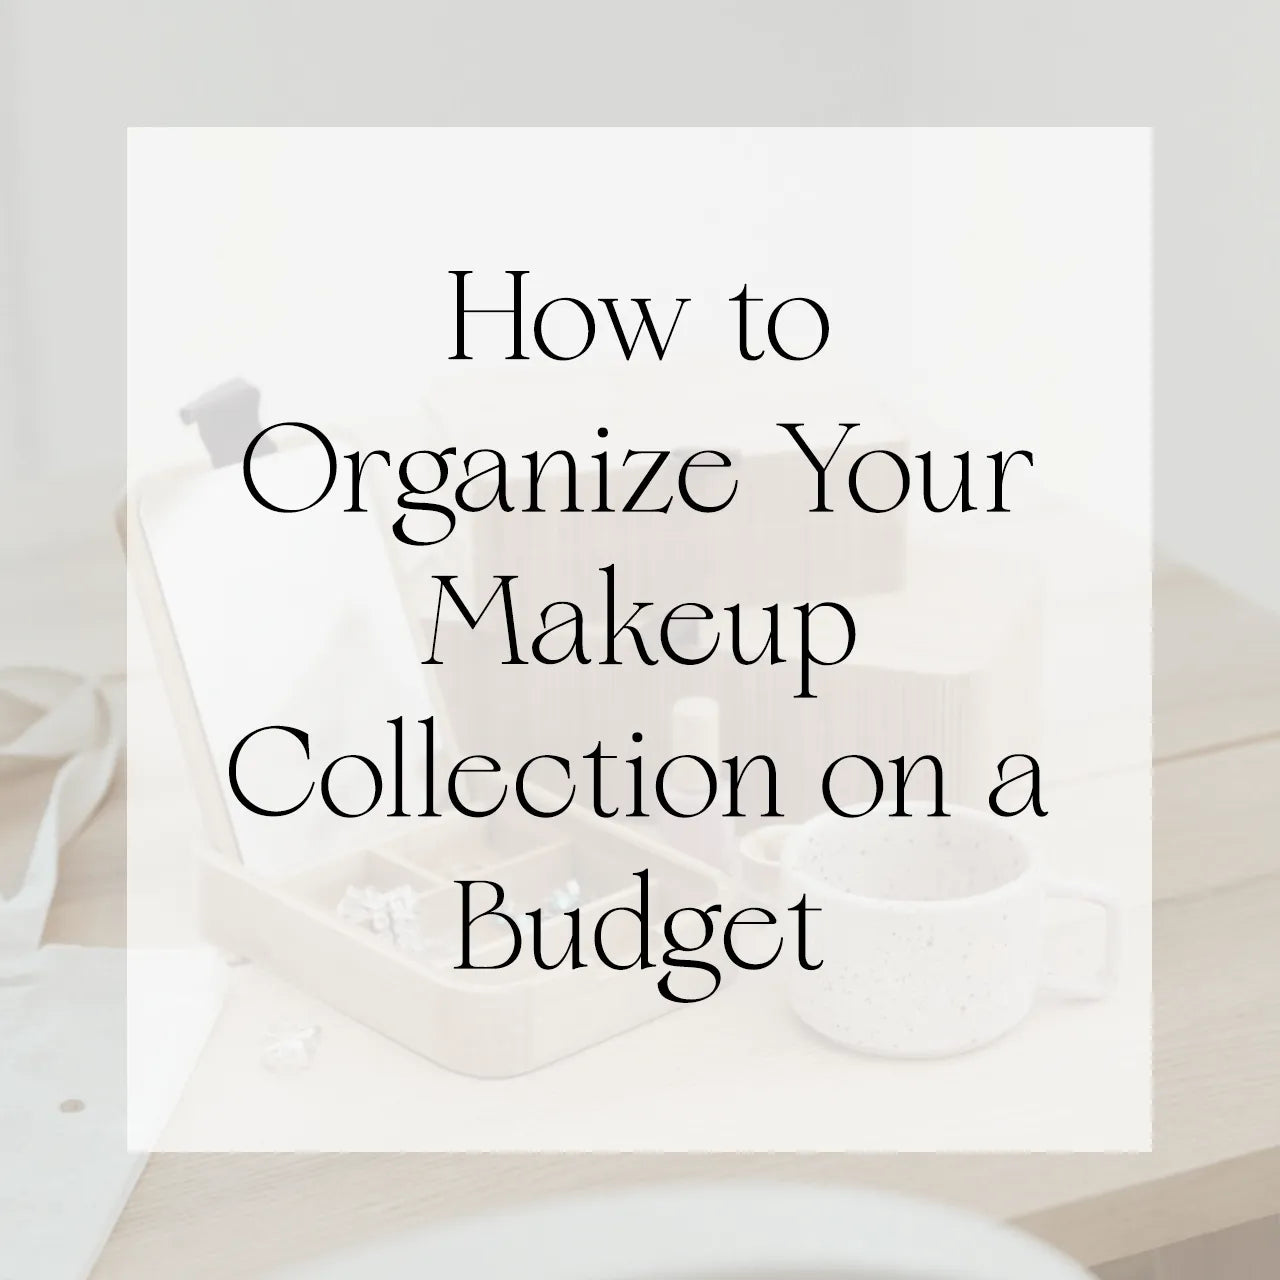 How to Organize Your Makeup Collection on a Budget